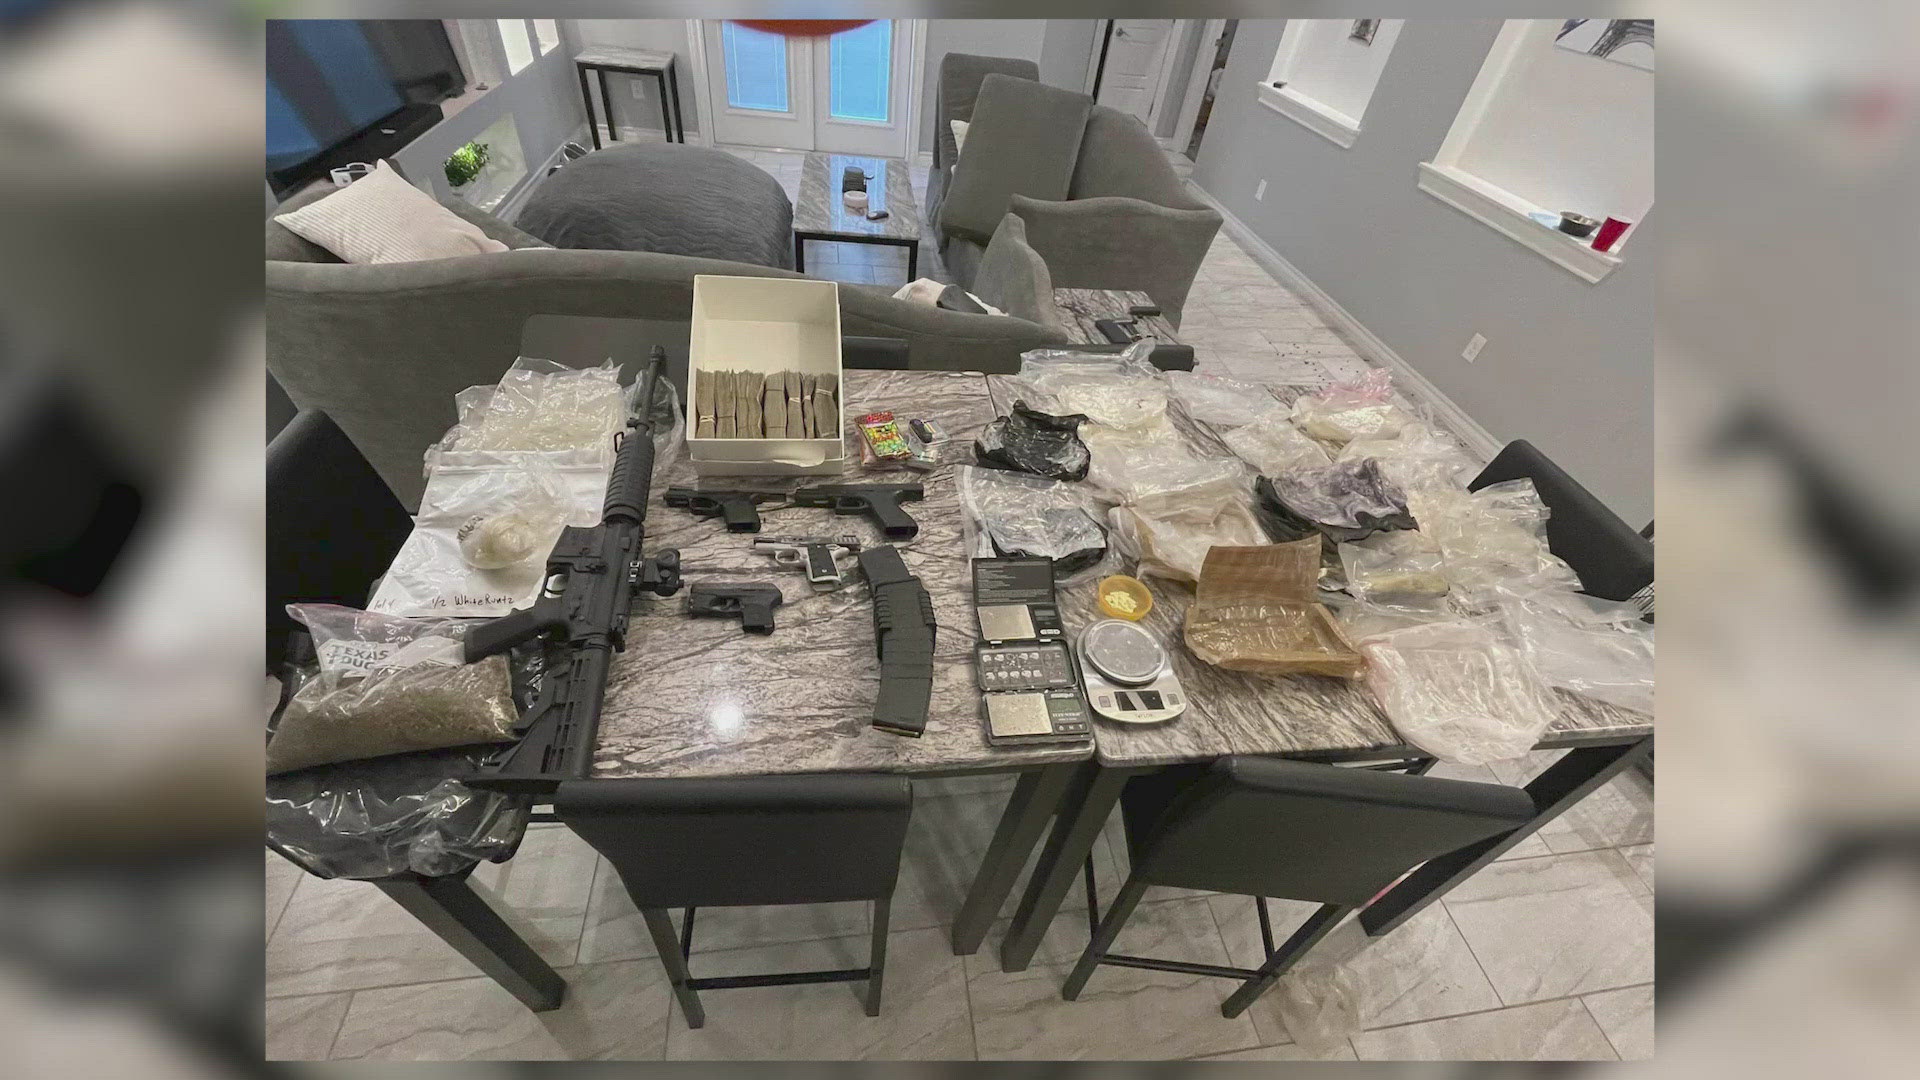 Five handguns, a rifle, jewelry valued over $30,000, cocaine, xanax pills, marijuana, THC, scales, money counting machines, and drug packaging were found, BCSO says.